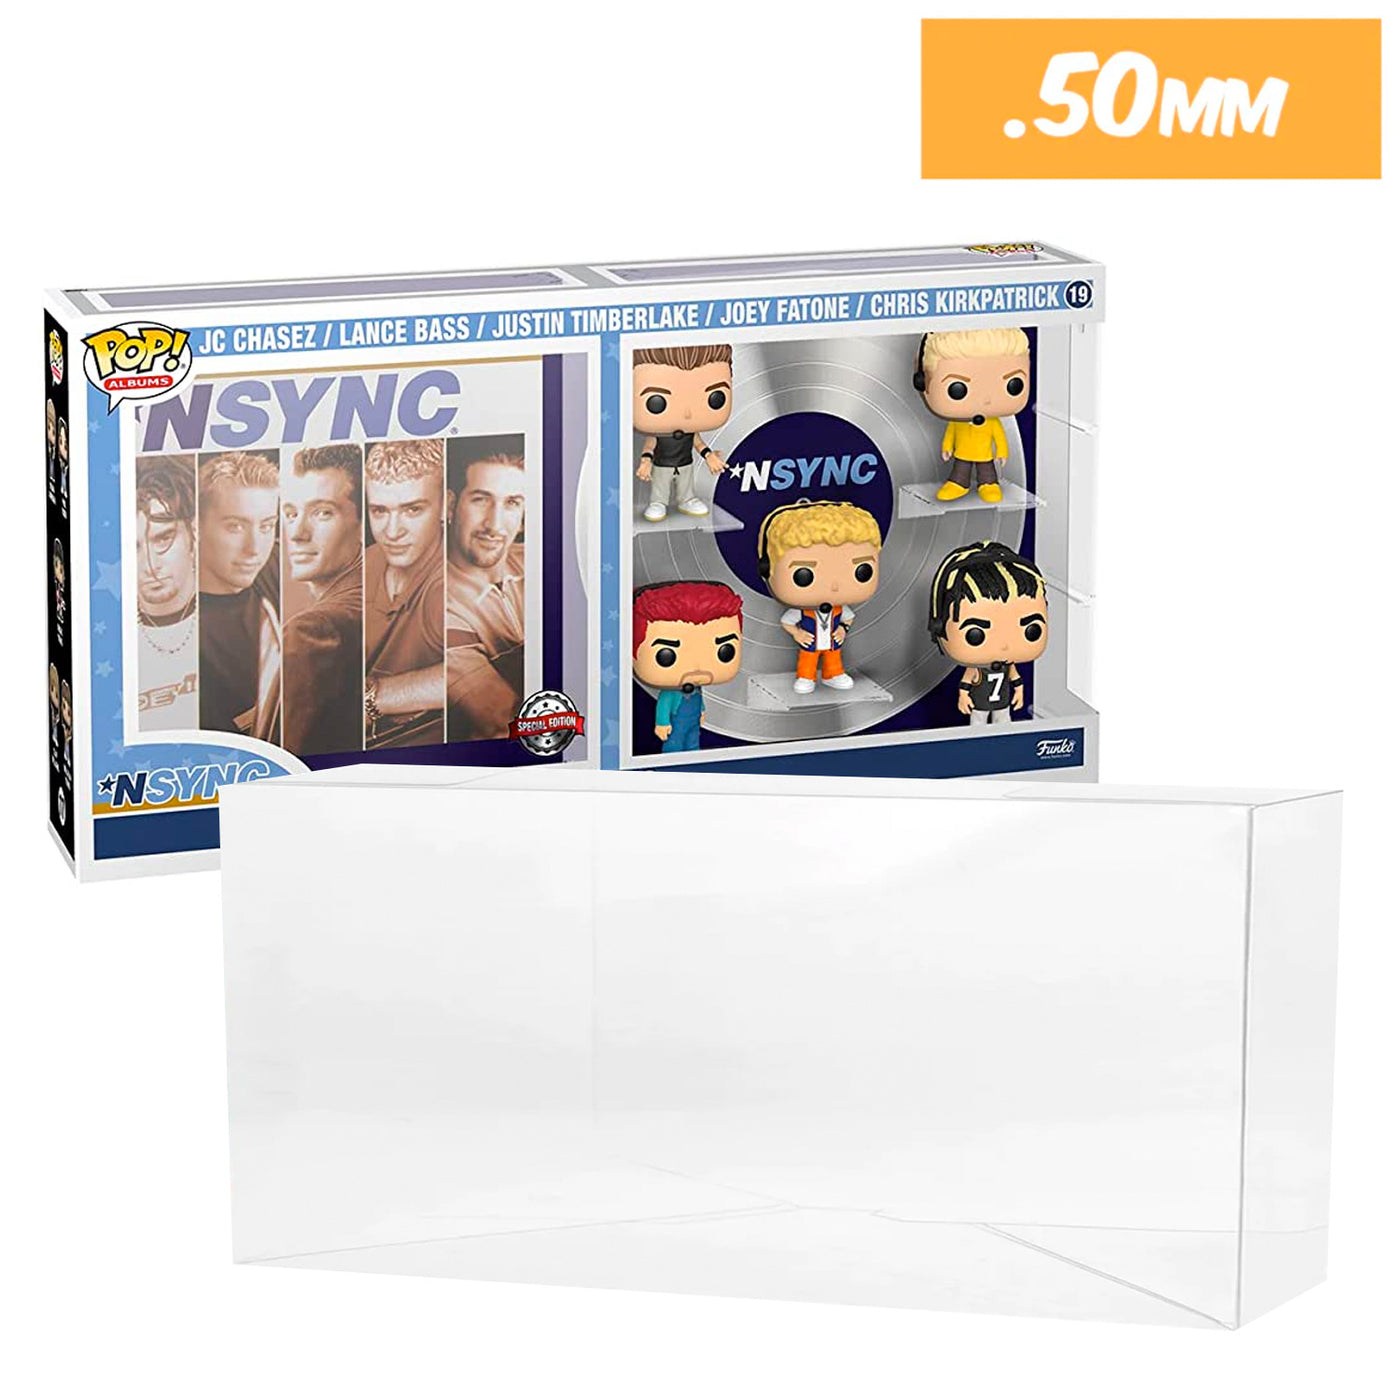 19 NSYNC debut pop albums deluxe best funko pop protectors thick strong uv scratch flat top stack vinyl display geek plastic shield vaulted eco armor fits collect protect display case kollector protector